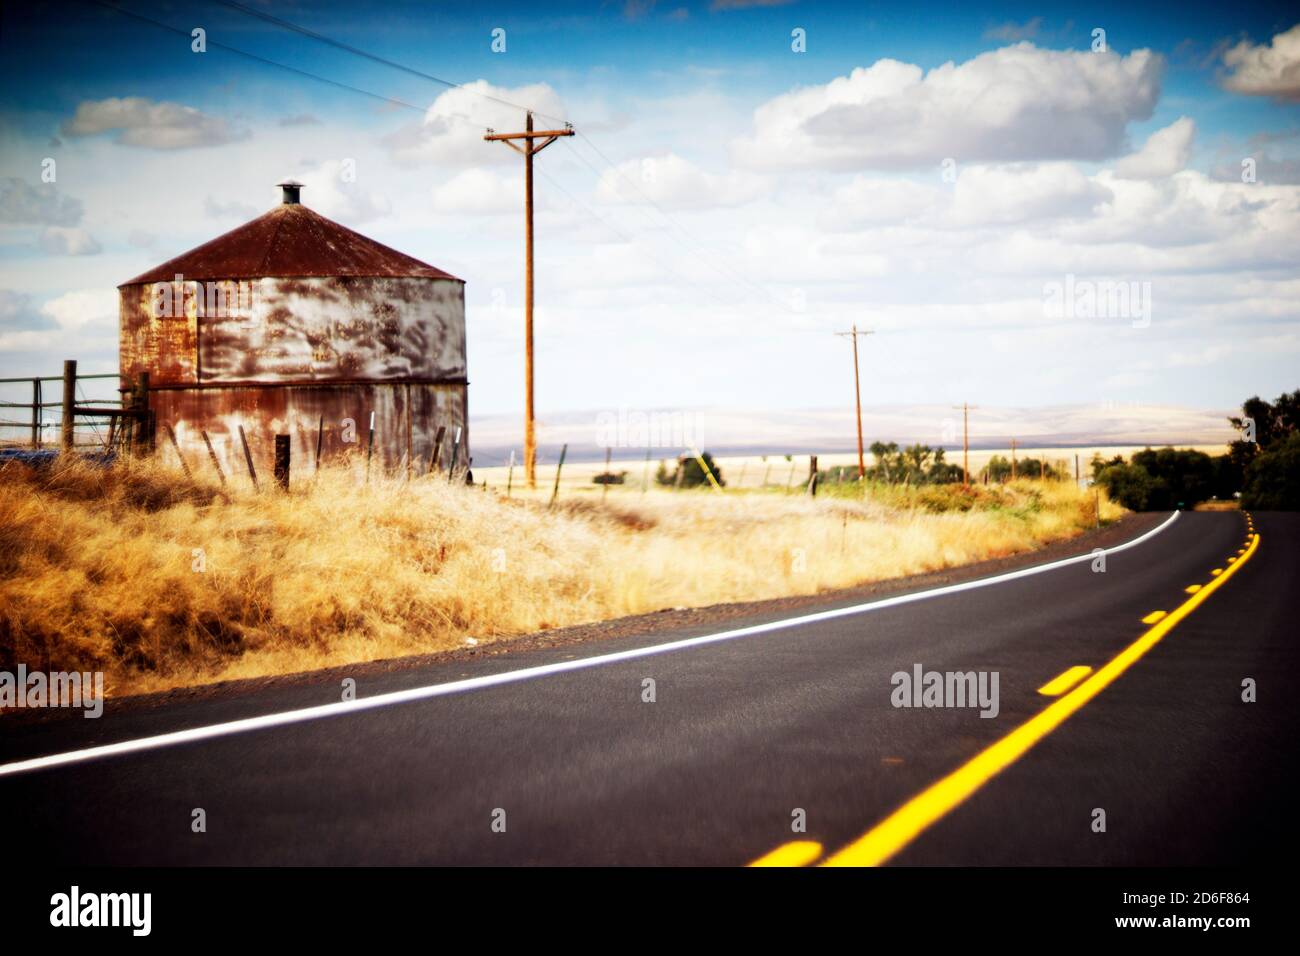 Rustic Agricultural Structure along Rural Highway Stock Photo